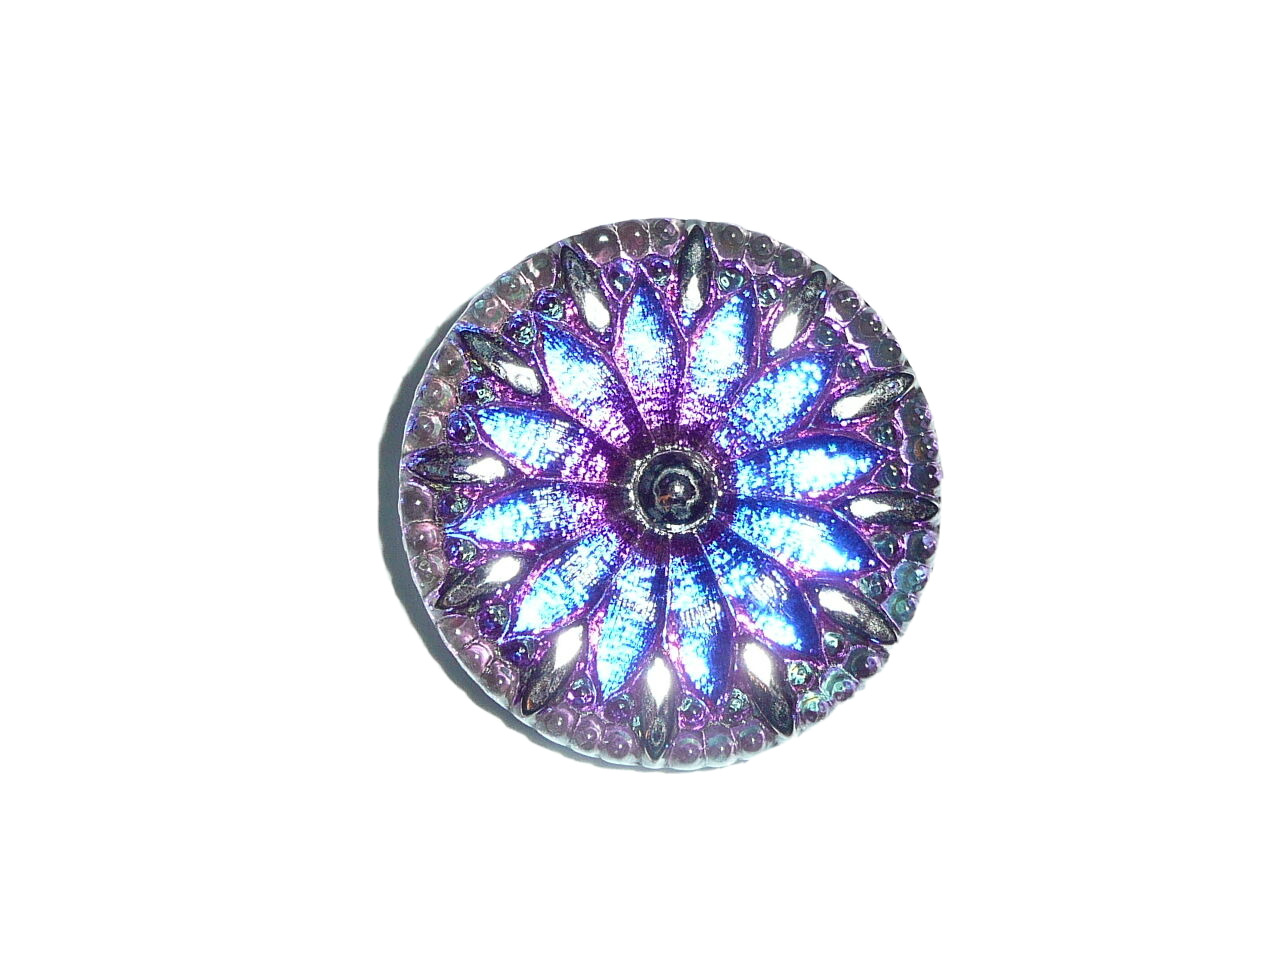 Amazing Large Czech Glass Flower Button - Vitral Purple & Pink w/Silver  31mm